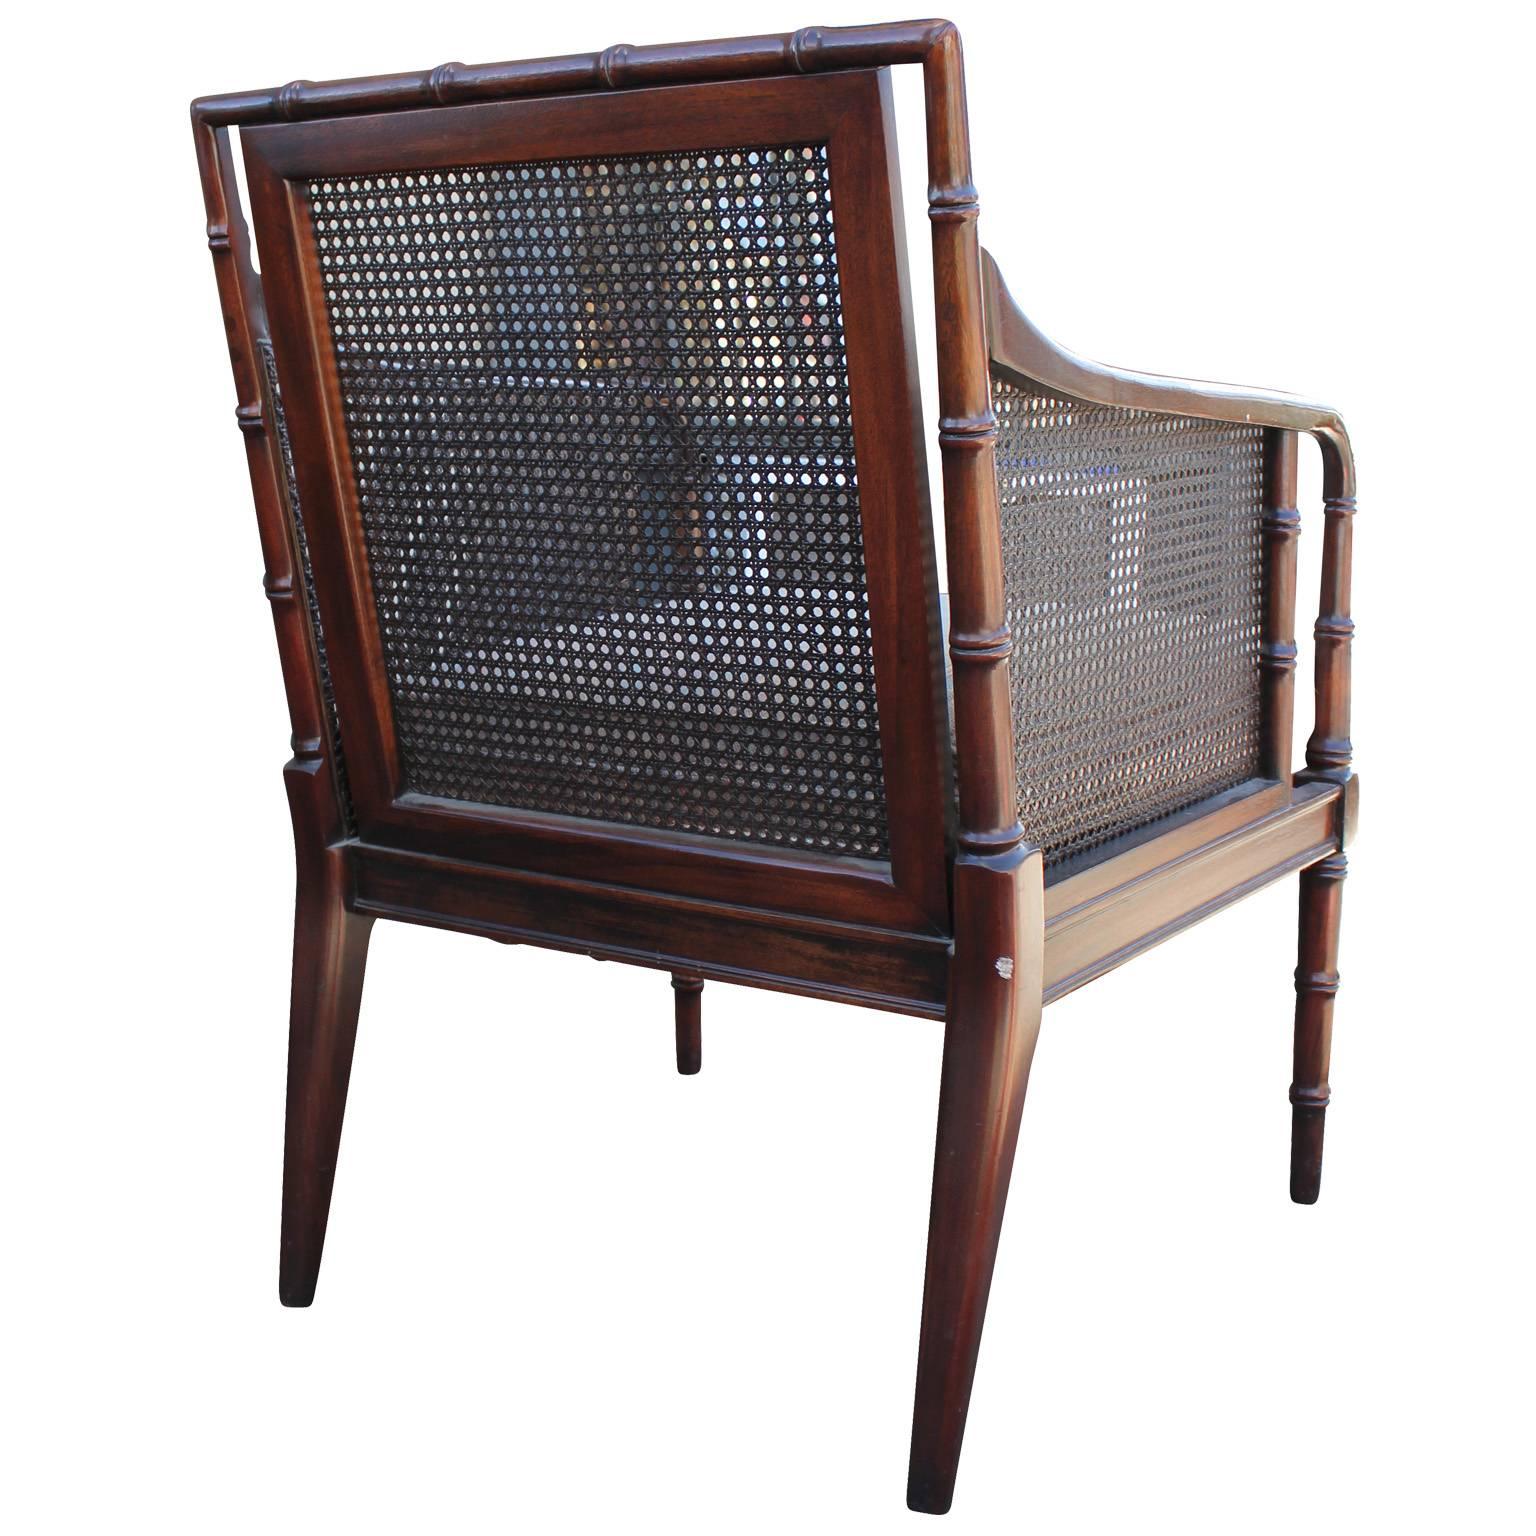 American Bamboo and Cane Regency Style Lounge Chairs